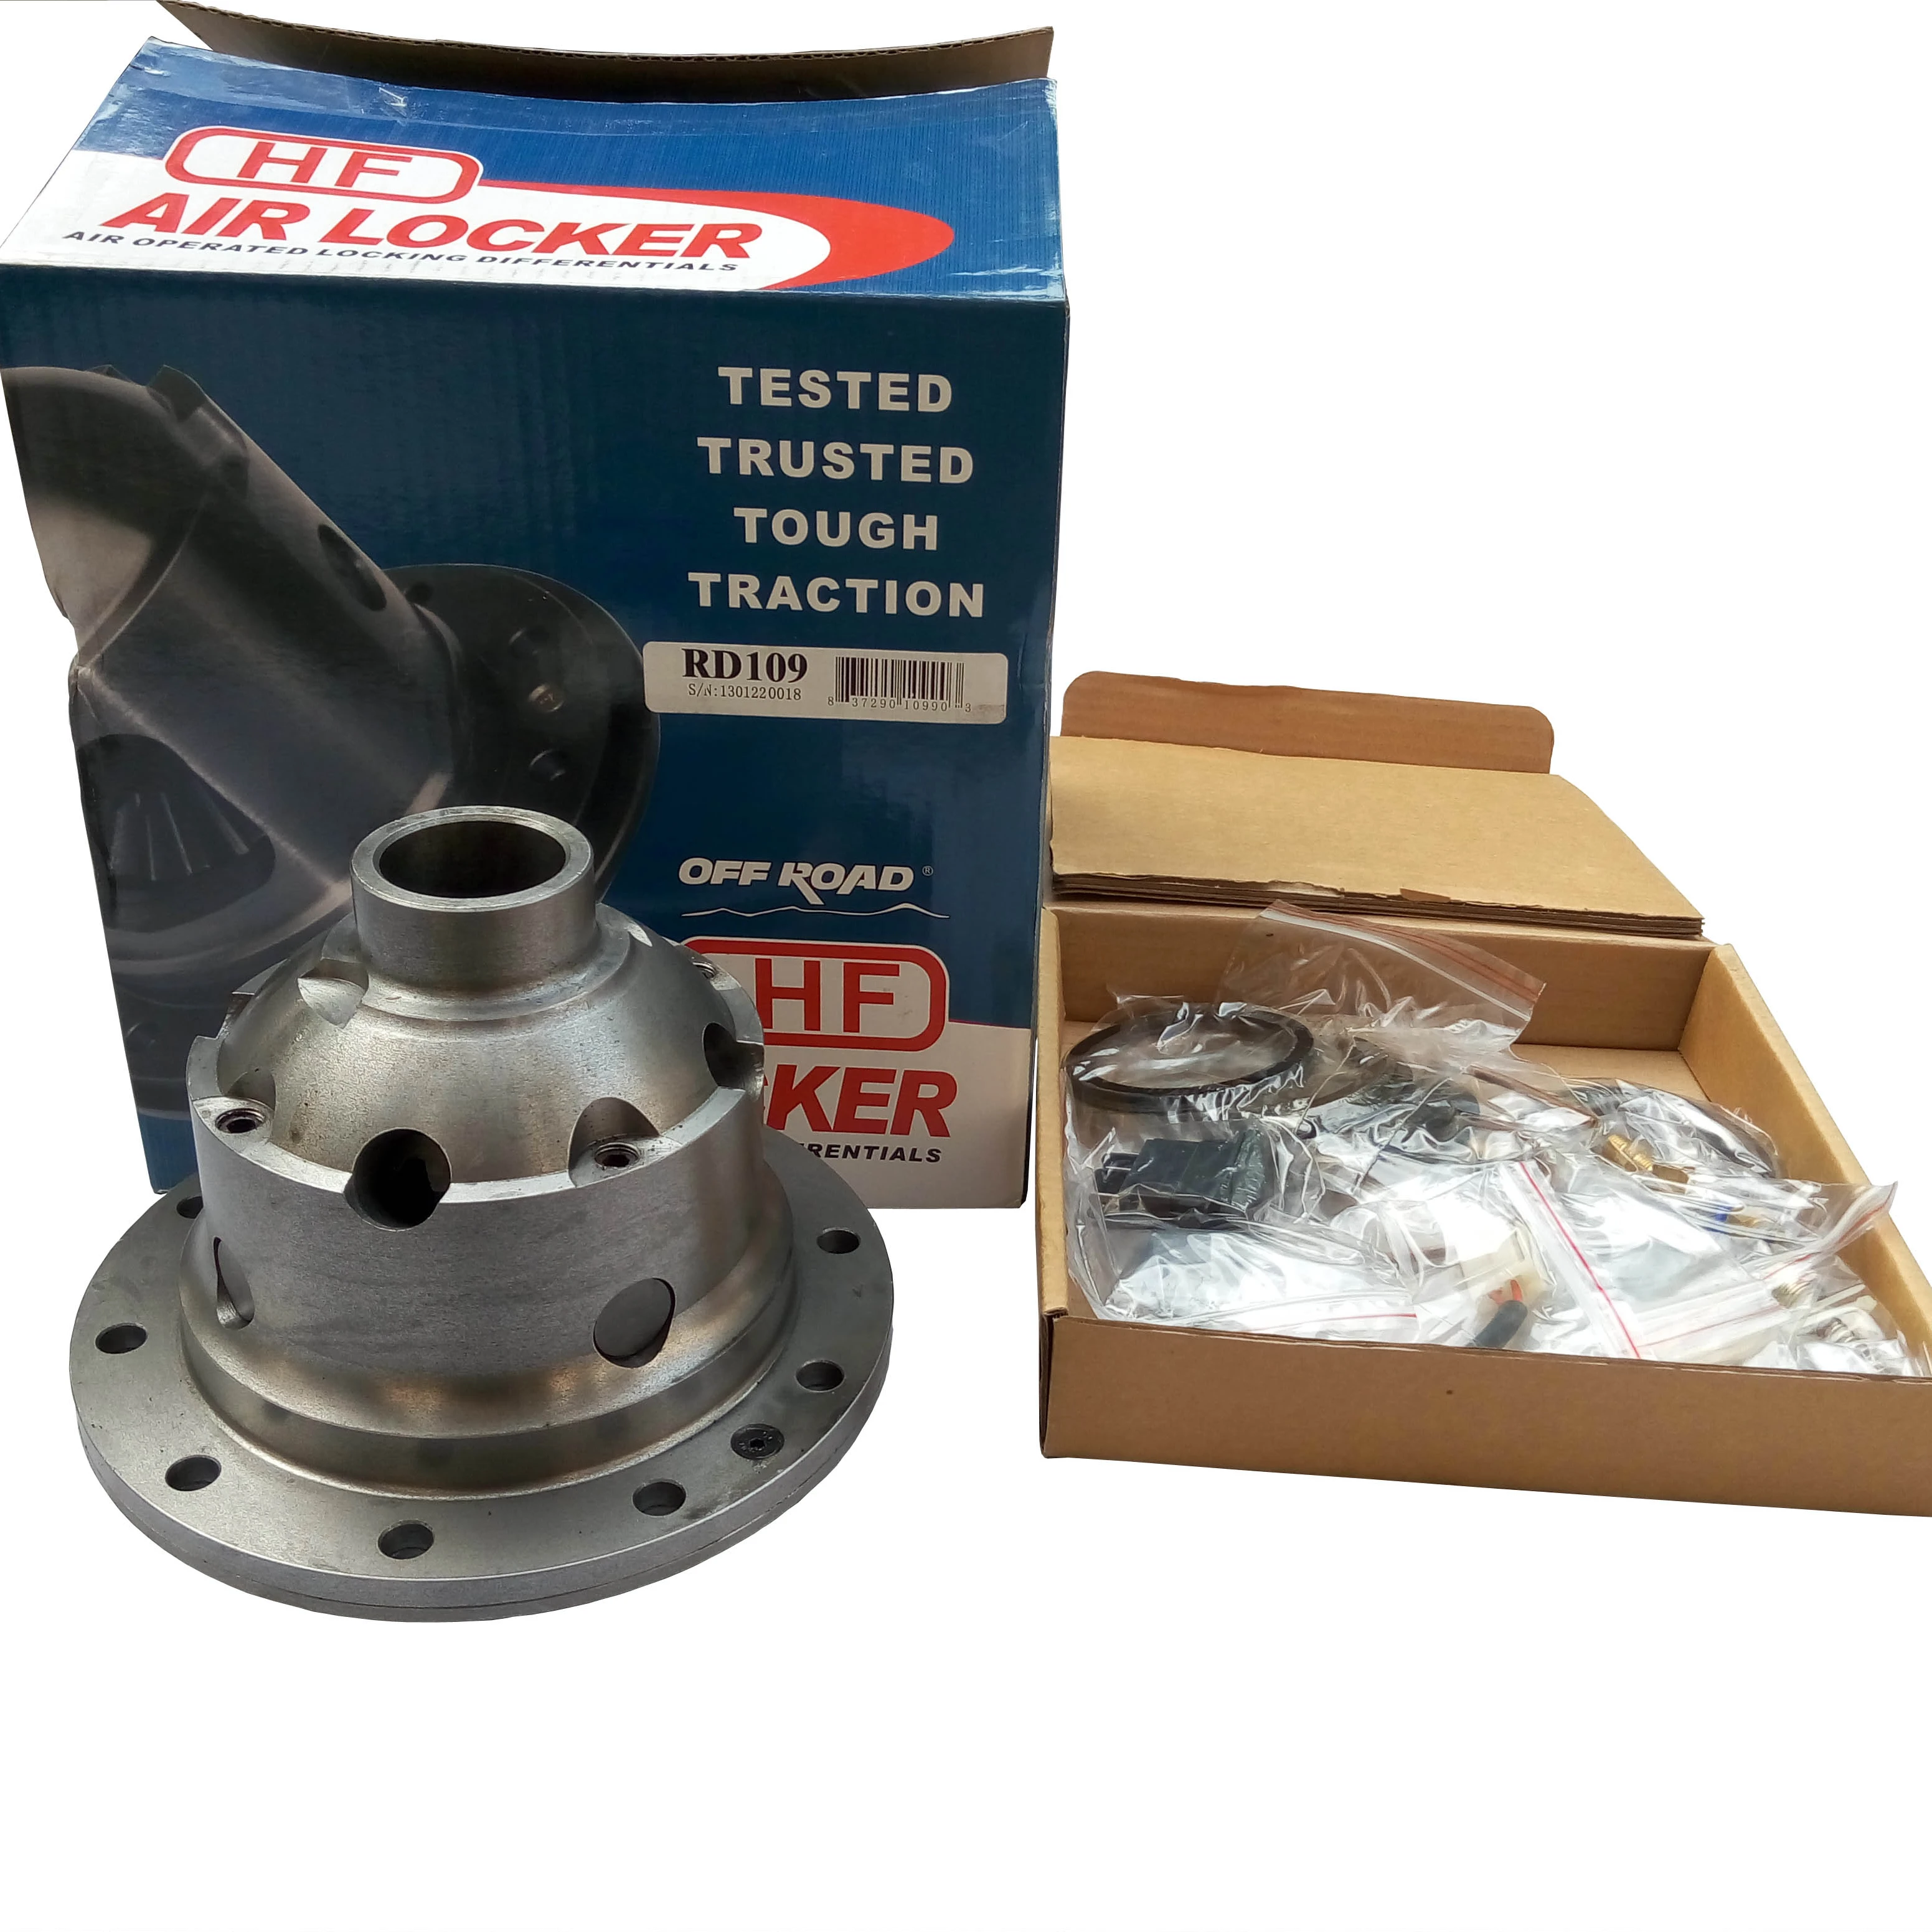 

China HF Best Quality RD109 air locker 4x4 auto off-road refit locking differential gear accessories